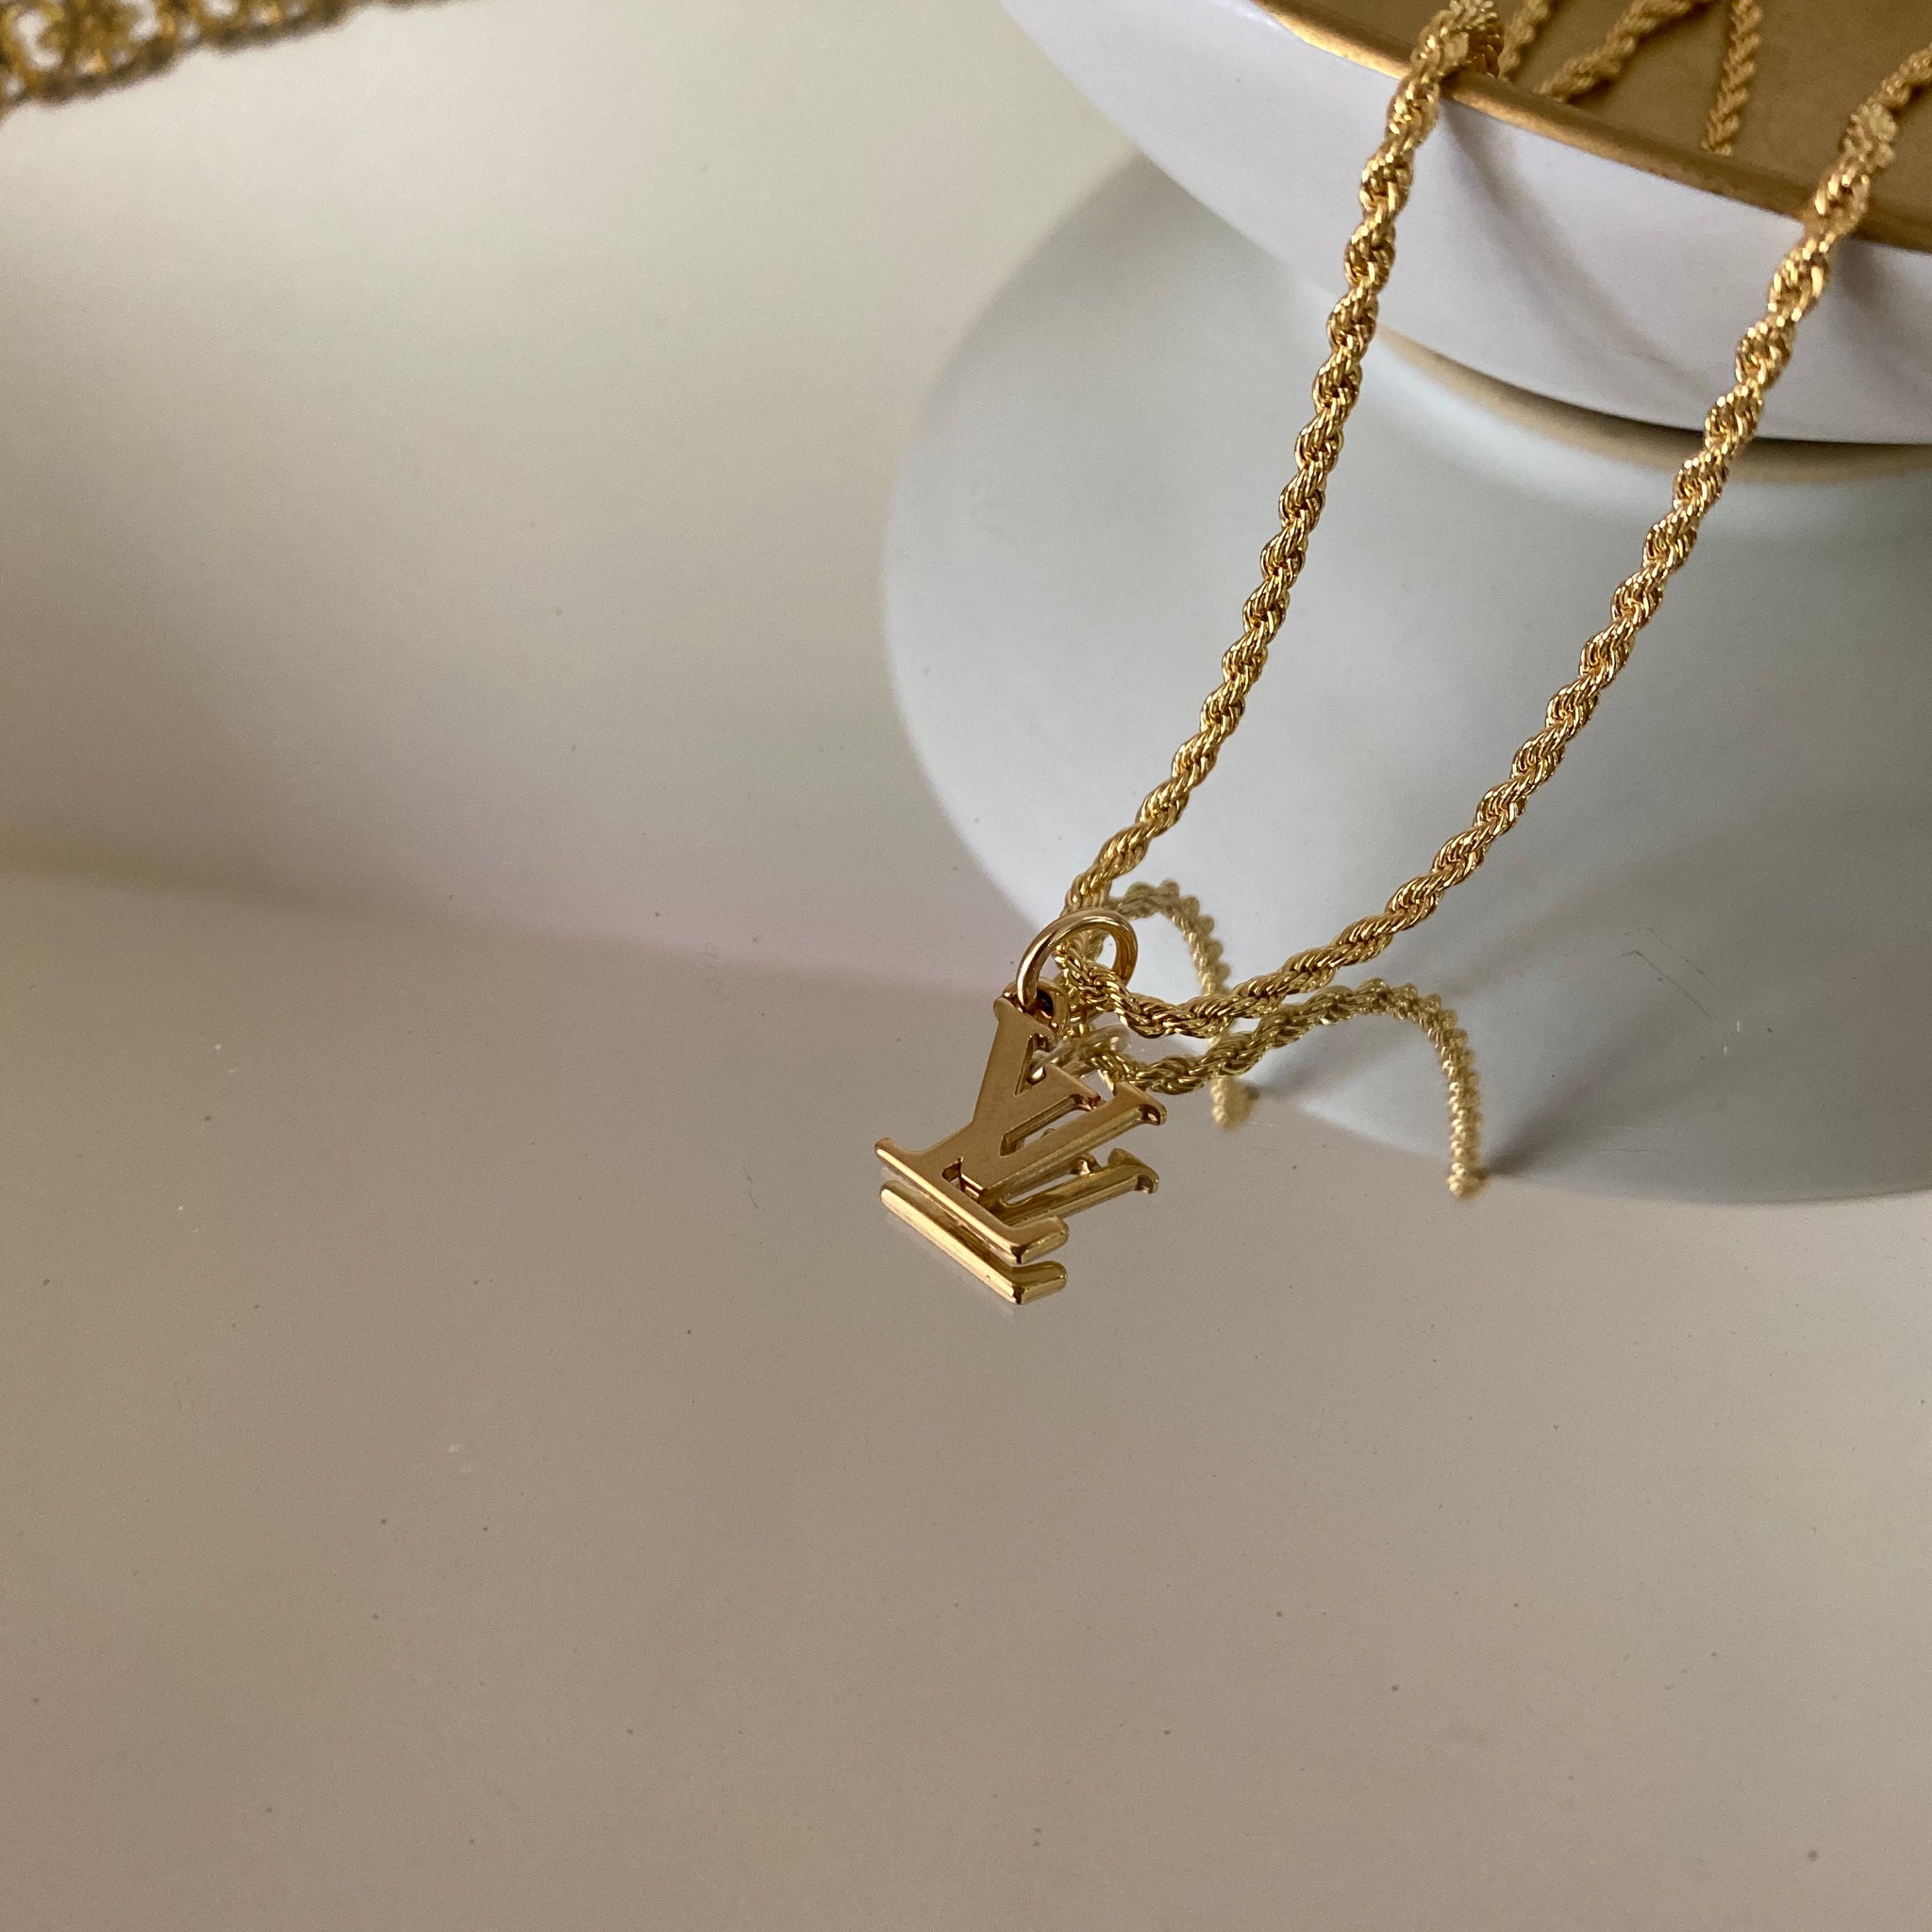 REPURPOSED VINTAGE LOUIS VUITTON ROPE CHAIN MONOGRAM CHARM NECKLACE – Once in a Moon Jewelry